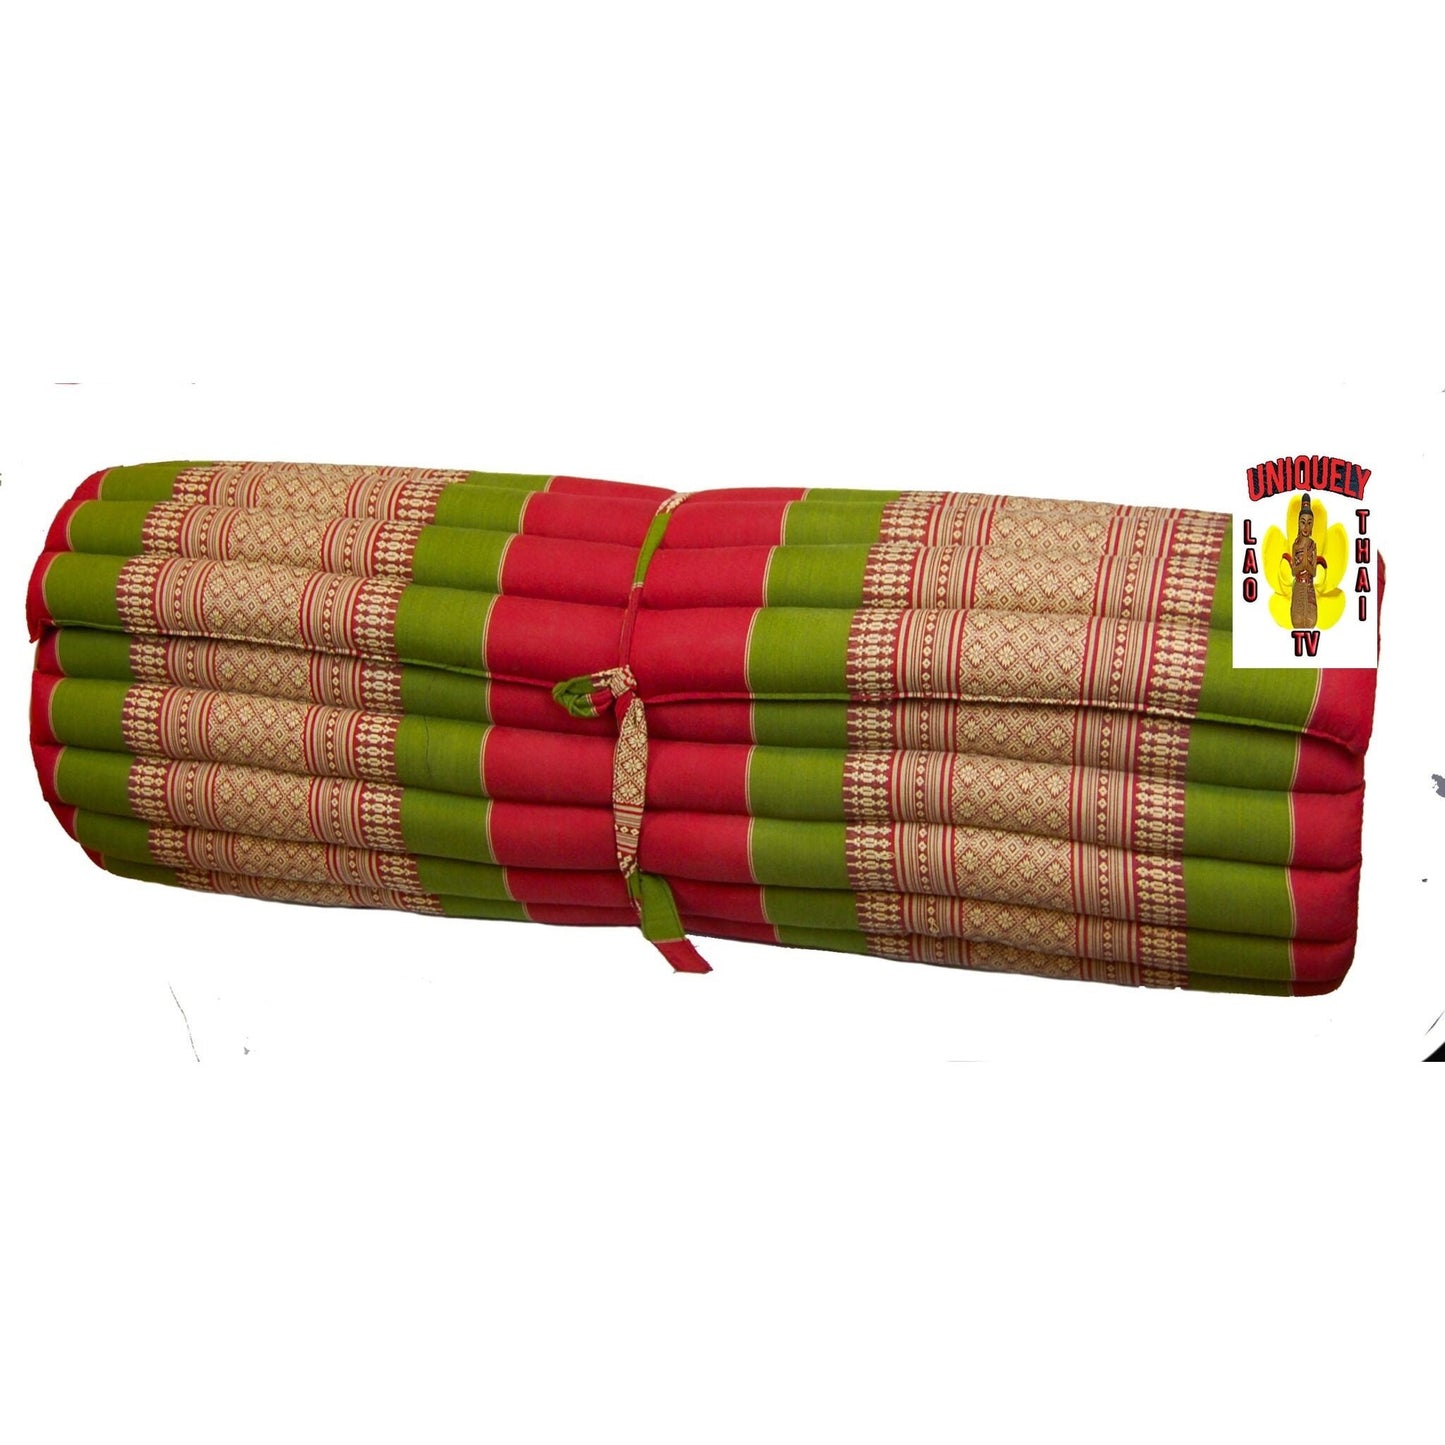 Roll-Up Thai Mattress Red and Green